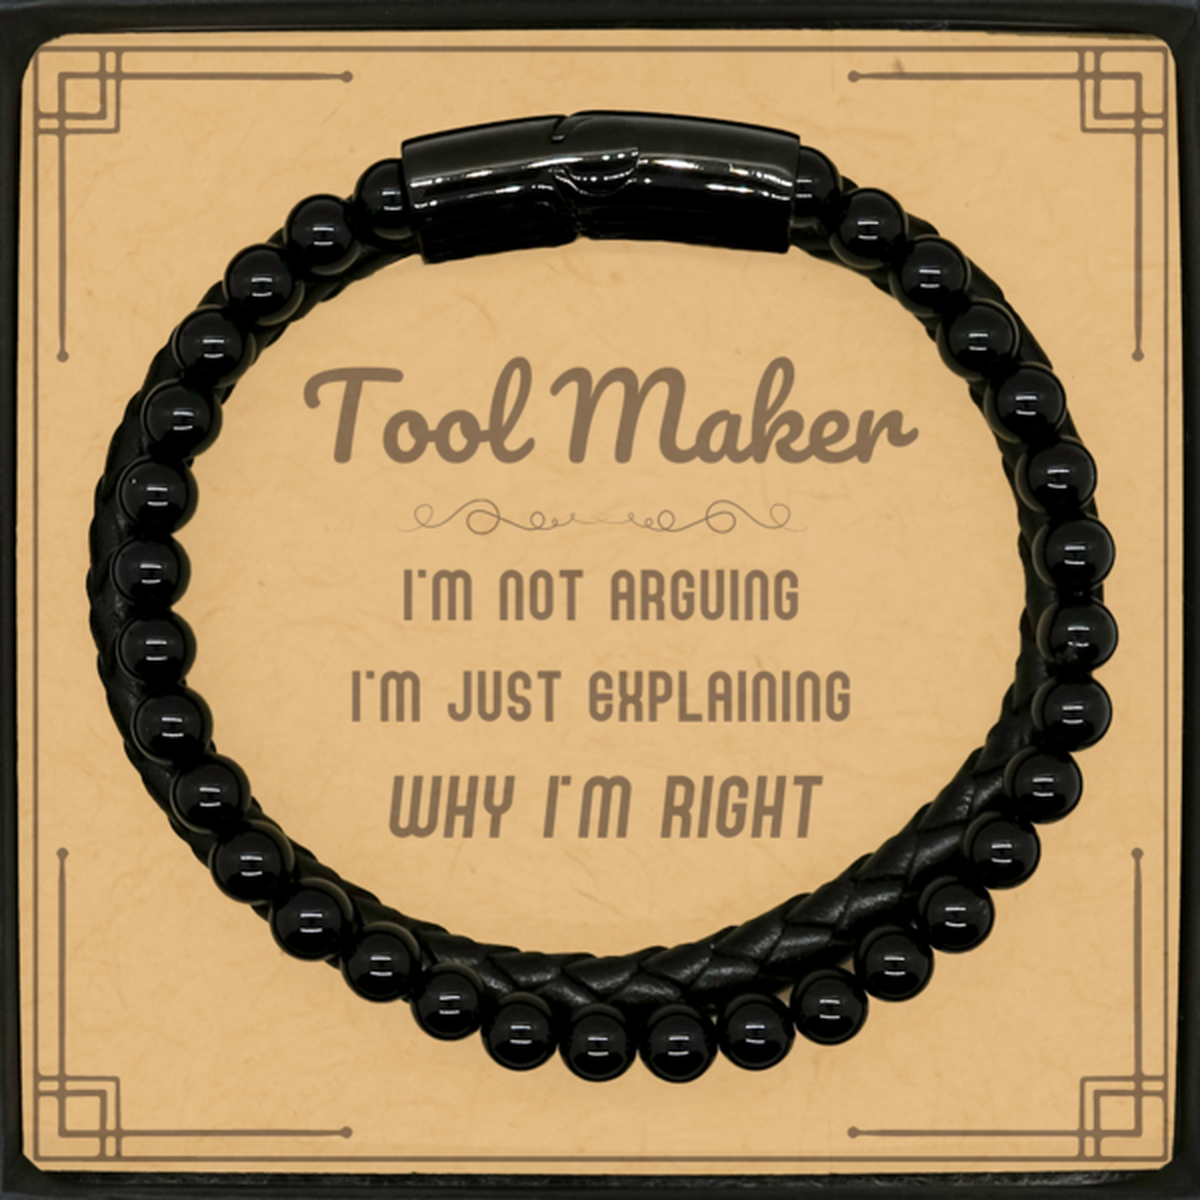 Tool Maker I'm not Arguing. I'm Just Explaining Why I'm RIGHT Stone Leather Bracelets, Funny Saying Quote Tool Maker Gifts For Tool Maker Message Card Graduation Birthday Christmas Gifts for Men Women Coworker